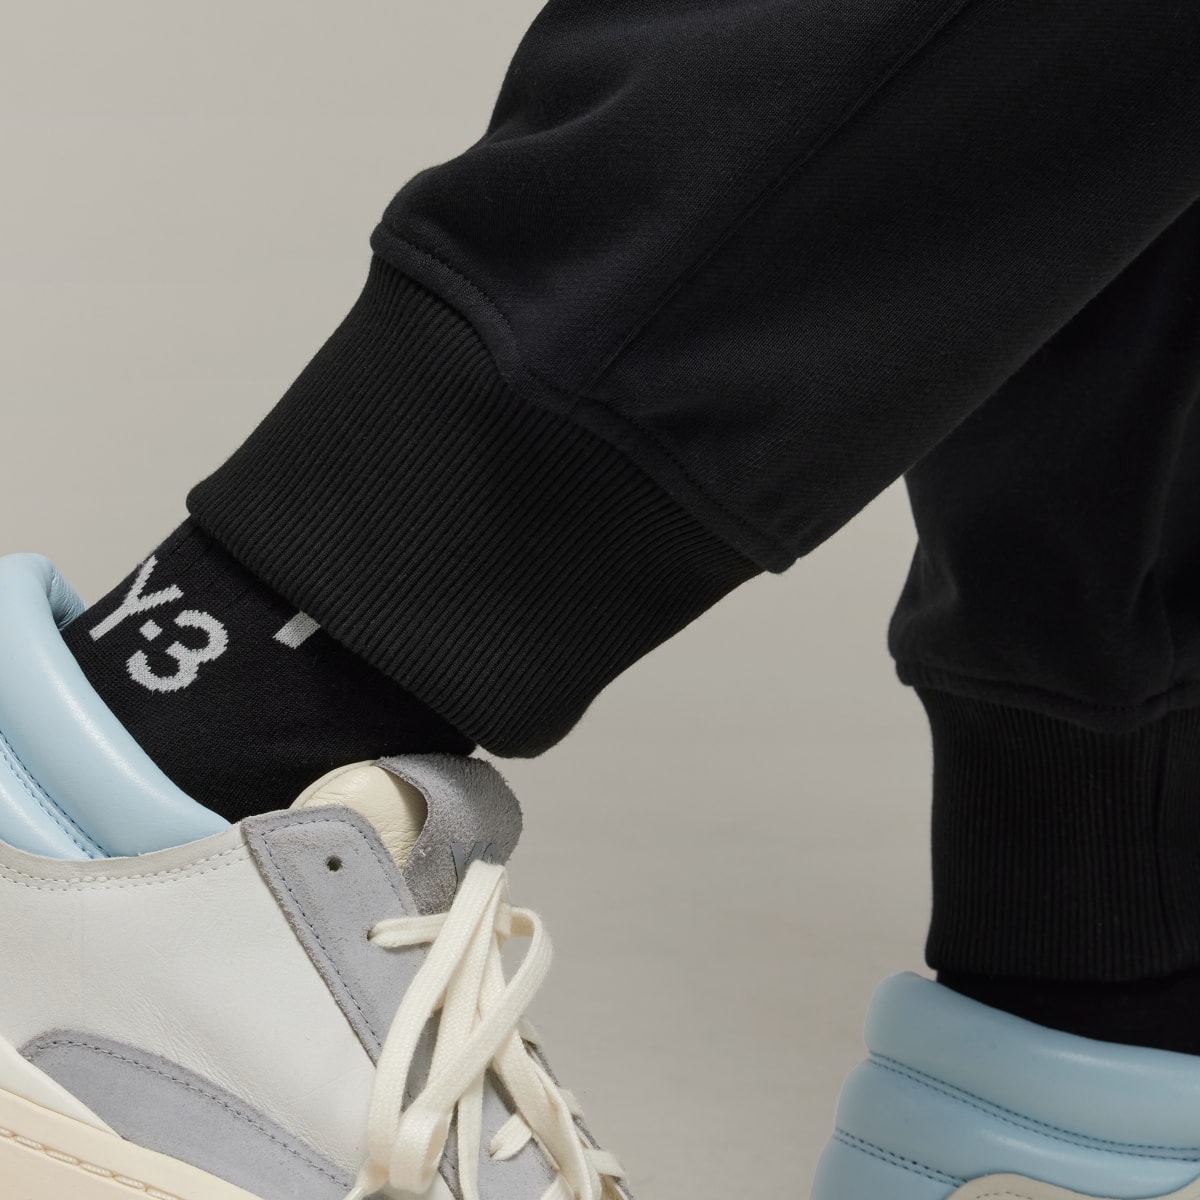 Adidas Y-3 French Terry Cuffed Pants. 8